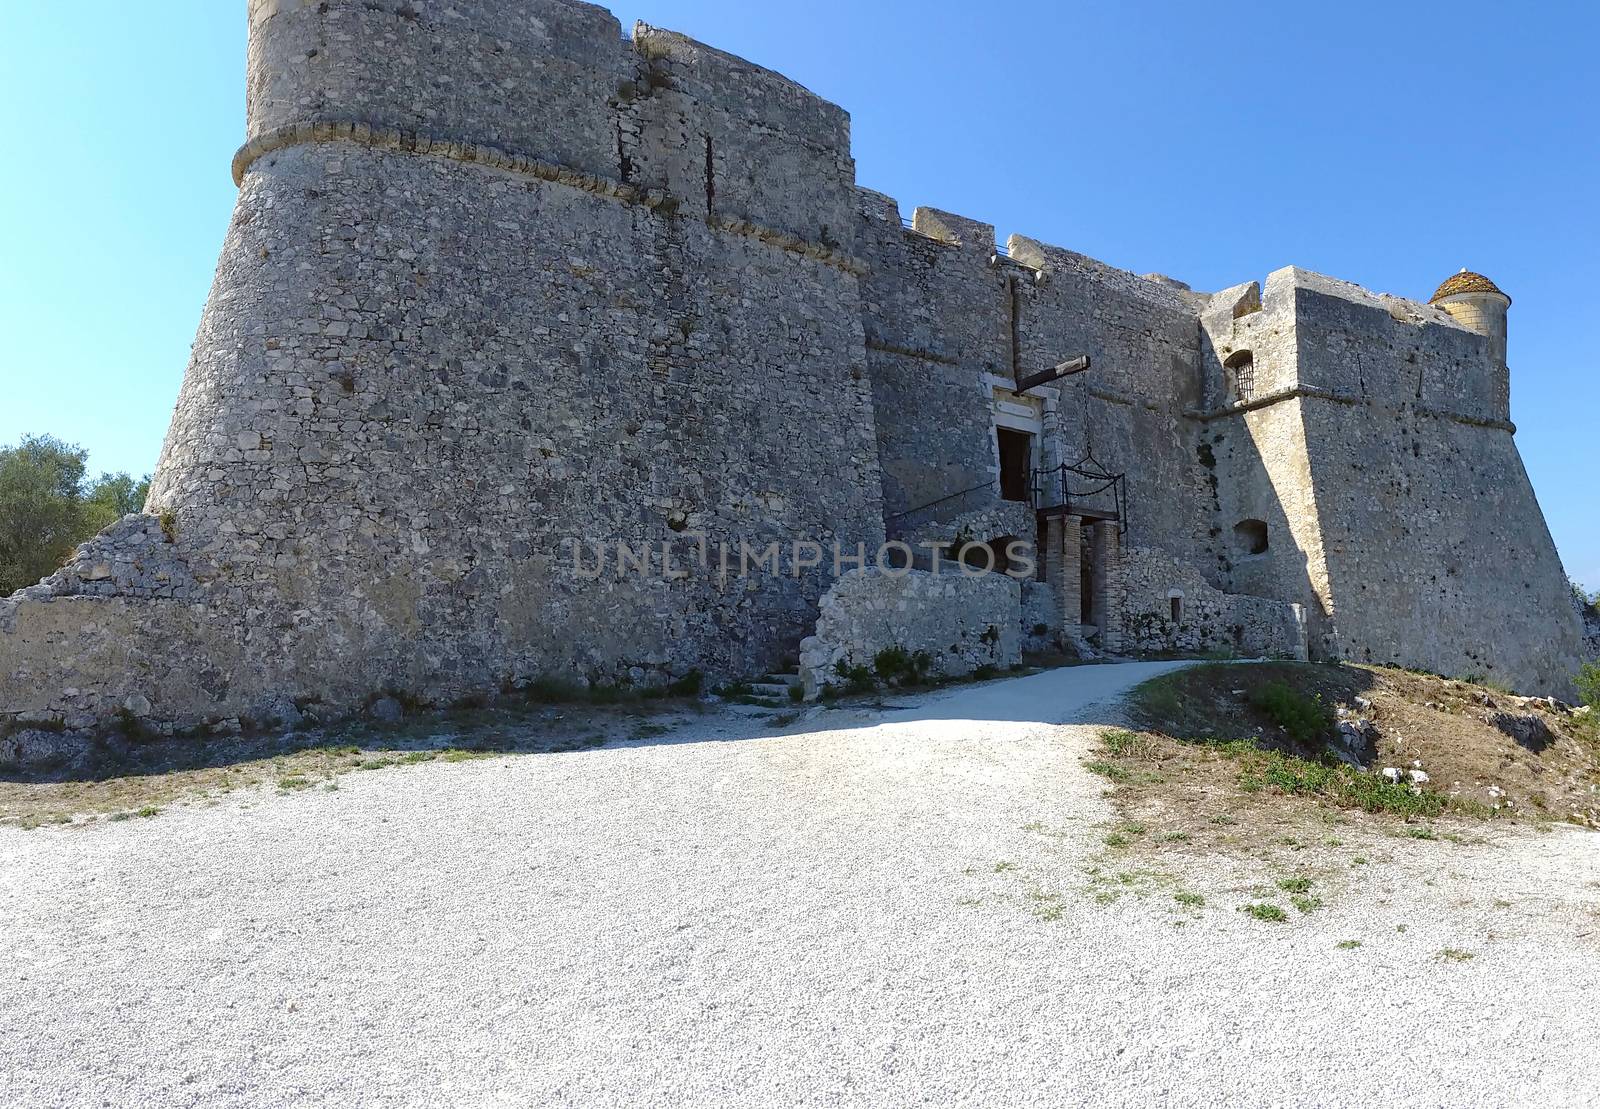 Panoramic view of the Fort du mont Alban. Old fortification near the city of Villefranche-sur-Mer